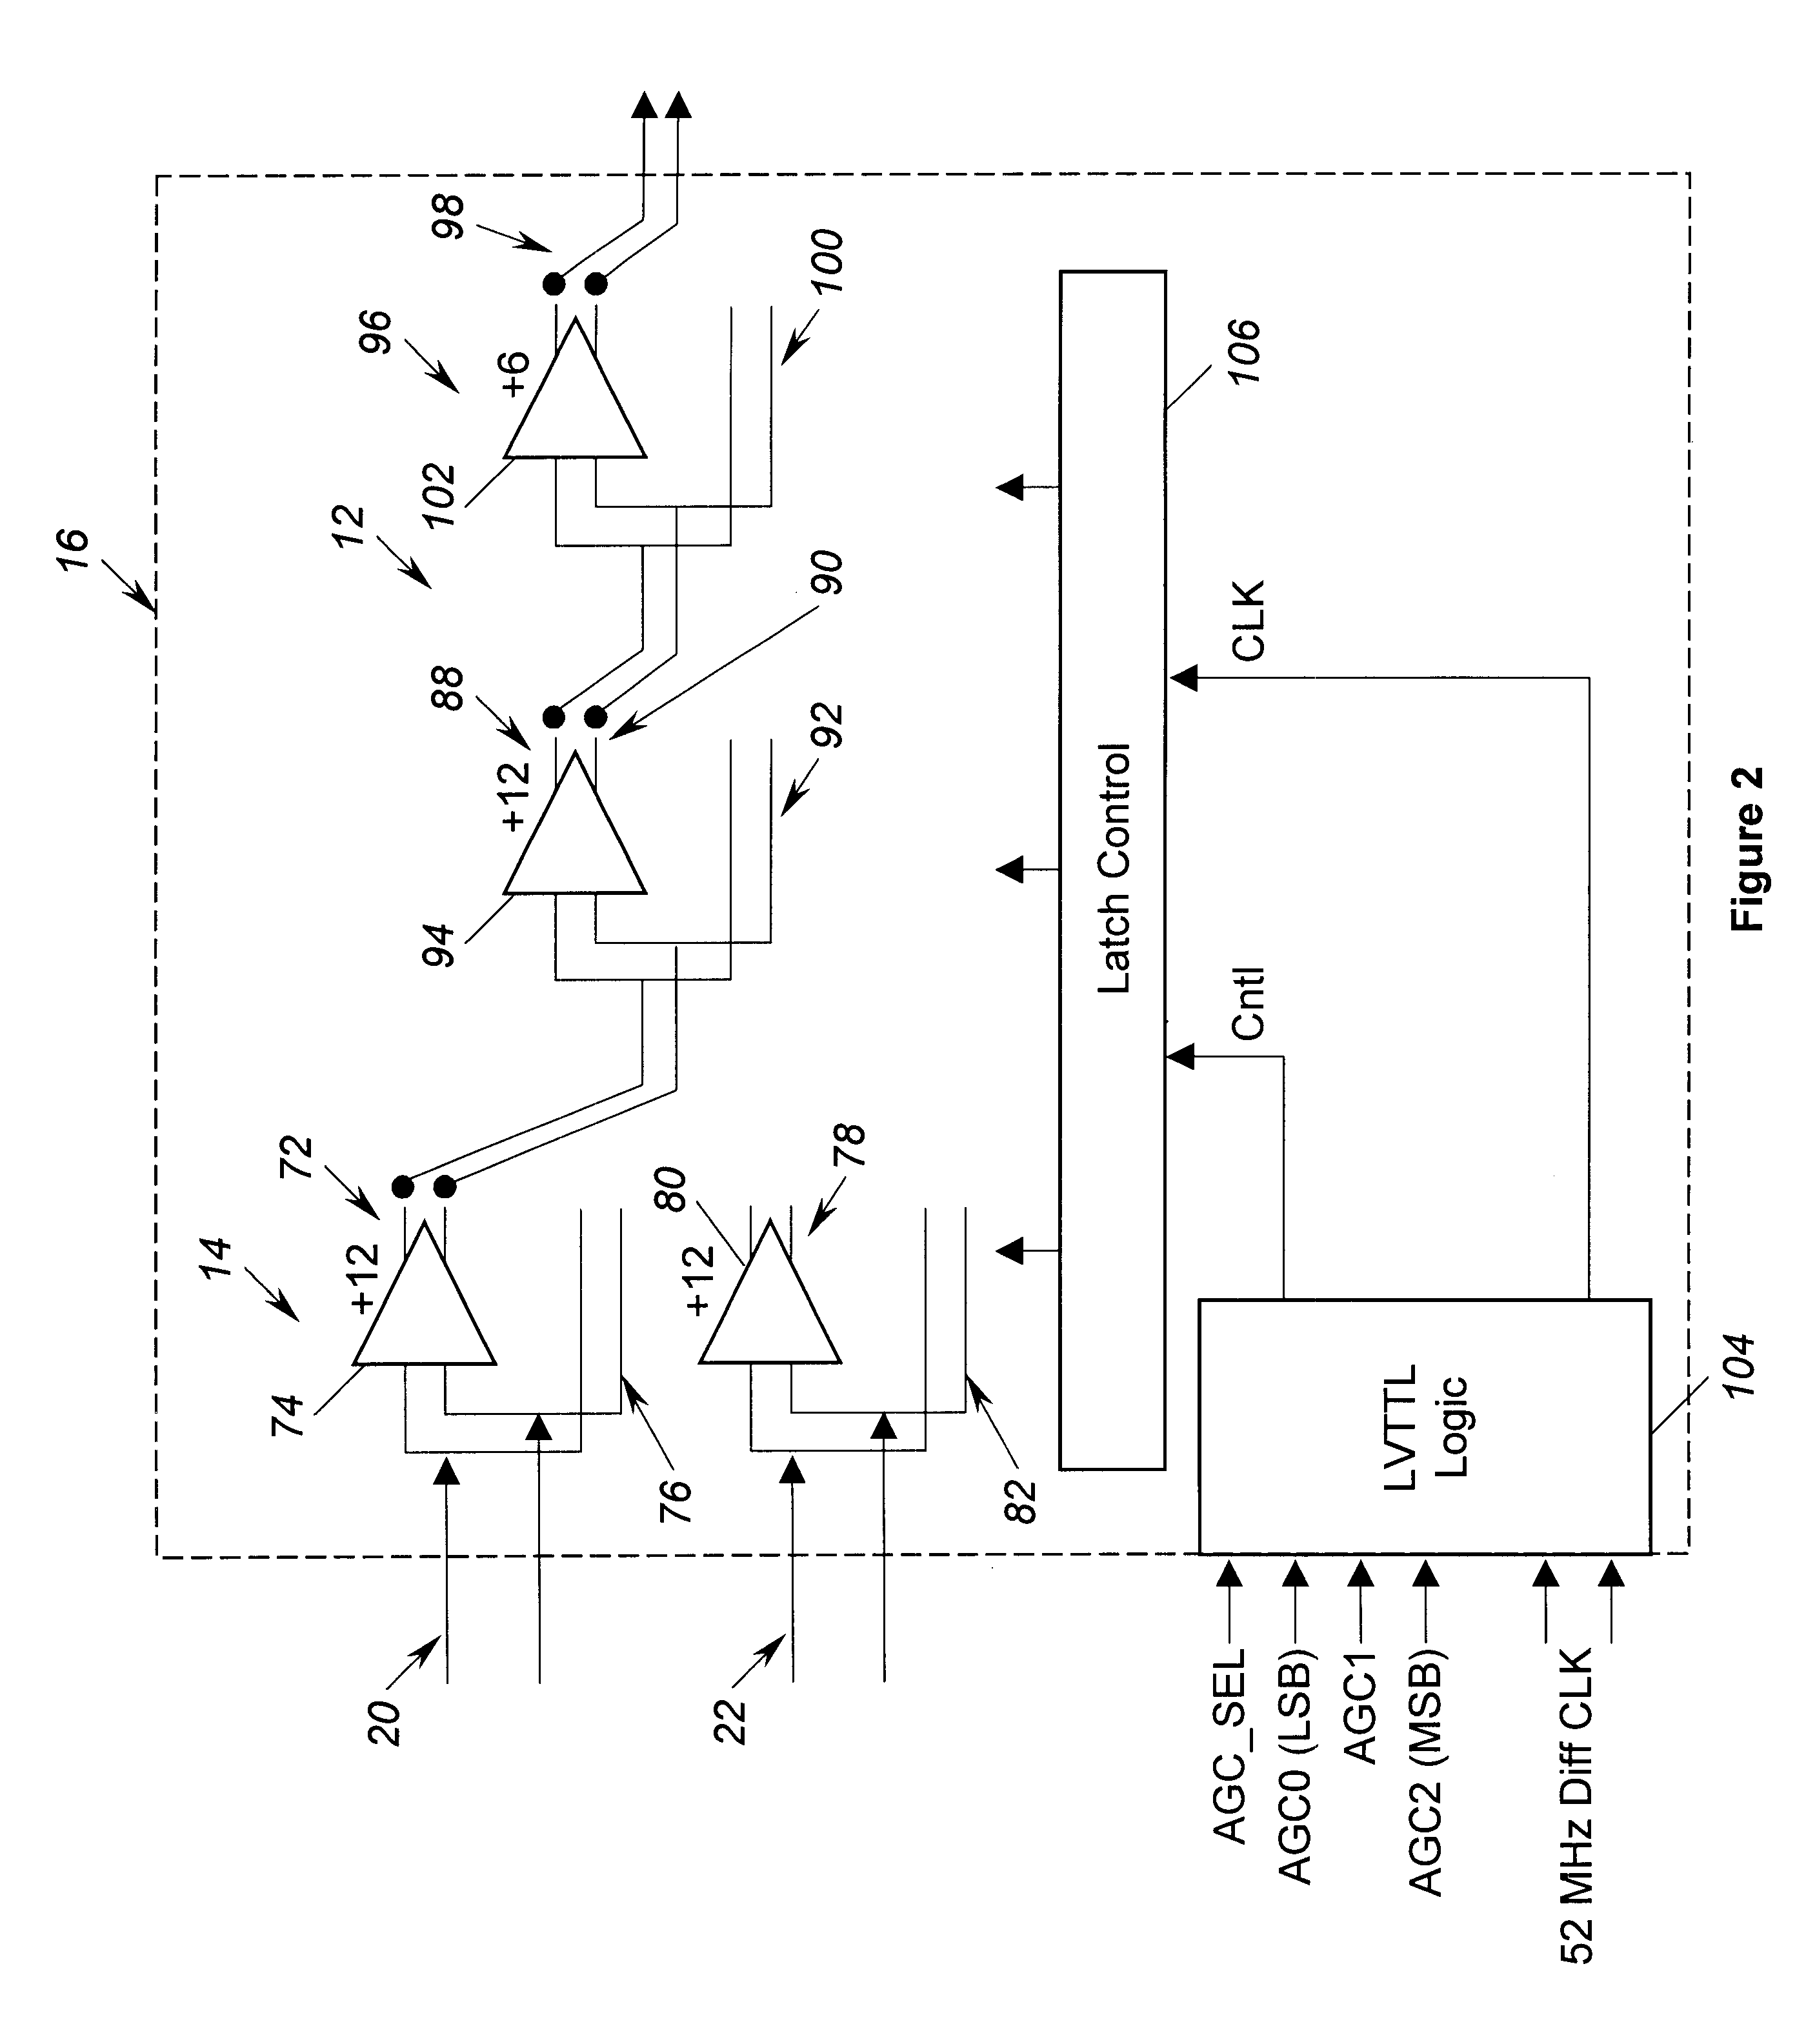 Combined multiplexer and switched gain circuit